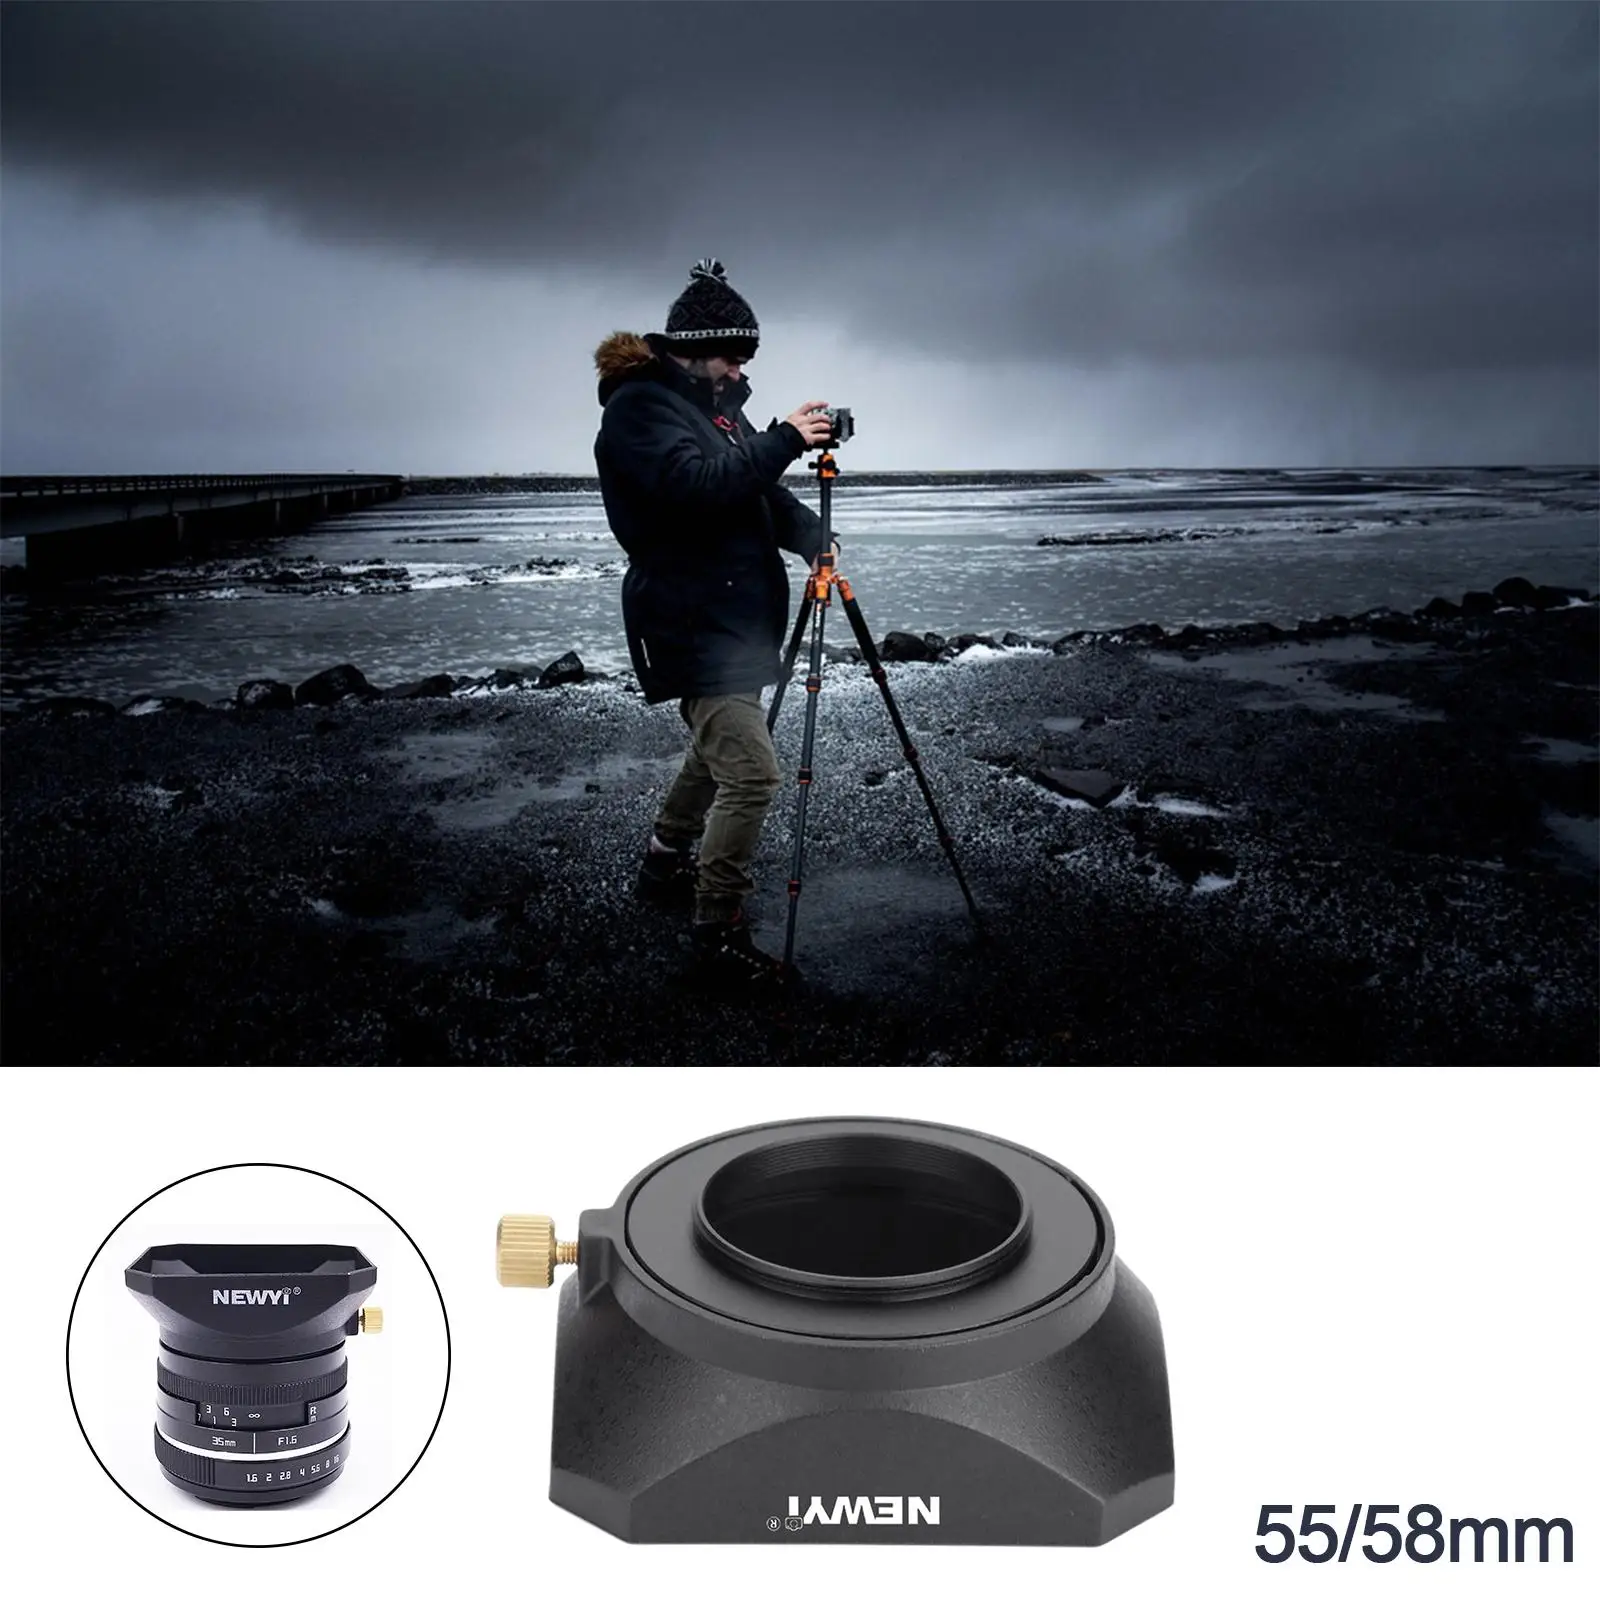 Square Camera Lens Hood  Interference Light Plastic with Screw Mount  for Mirrorless Camera, DSLR, Easy to Install